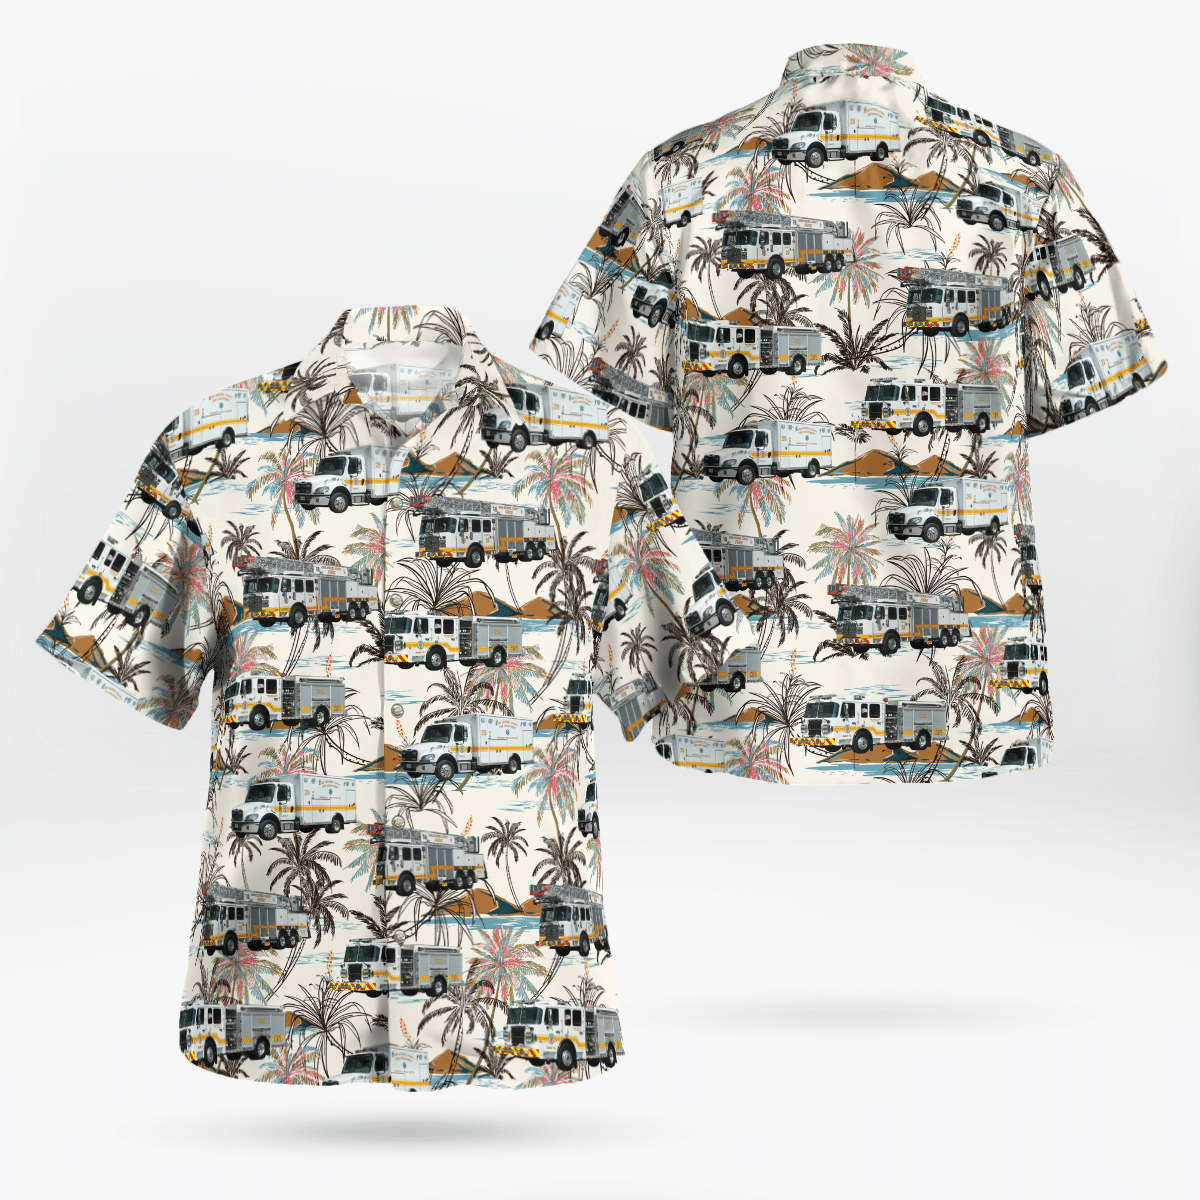 If you are in need of a new summertime look, pick up this Hawaiian shirt 70